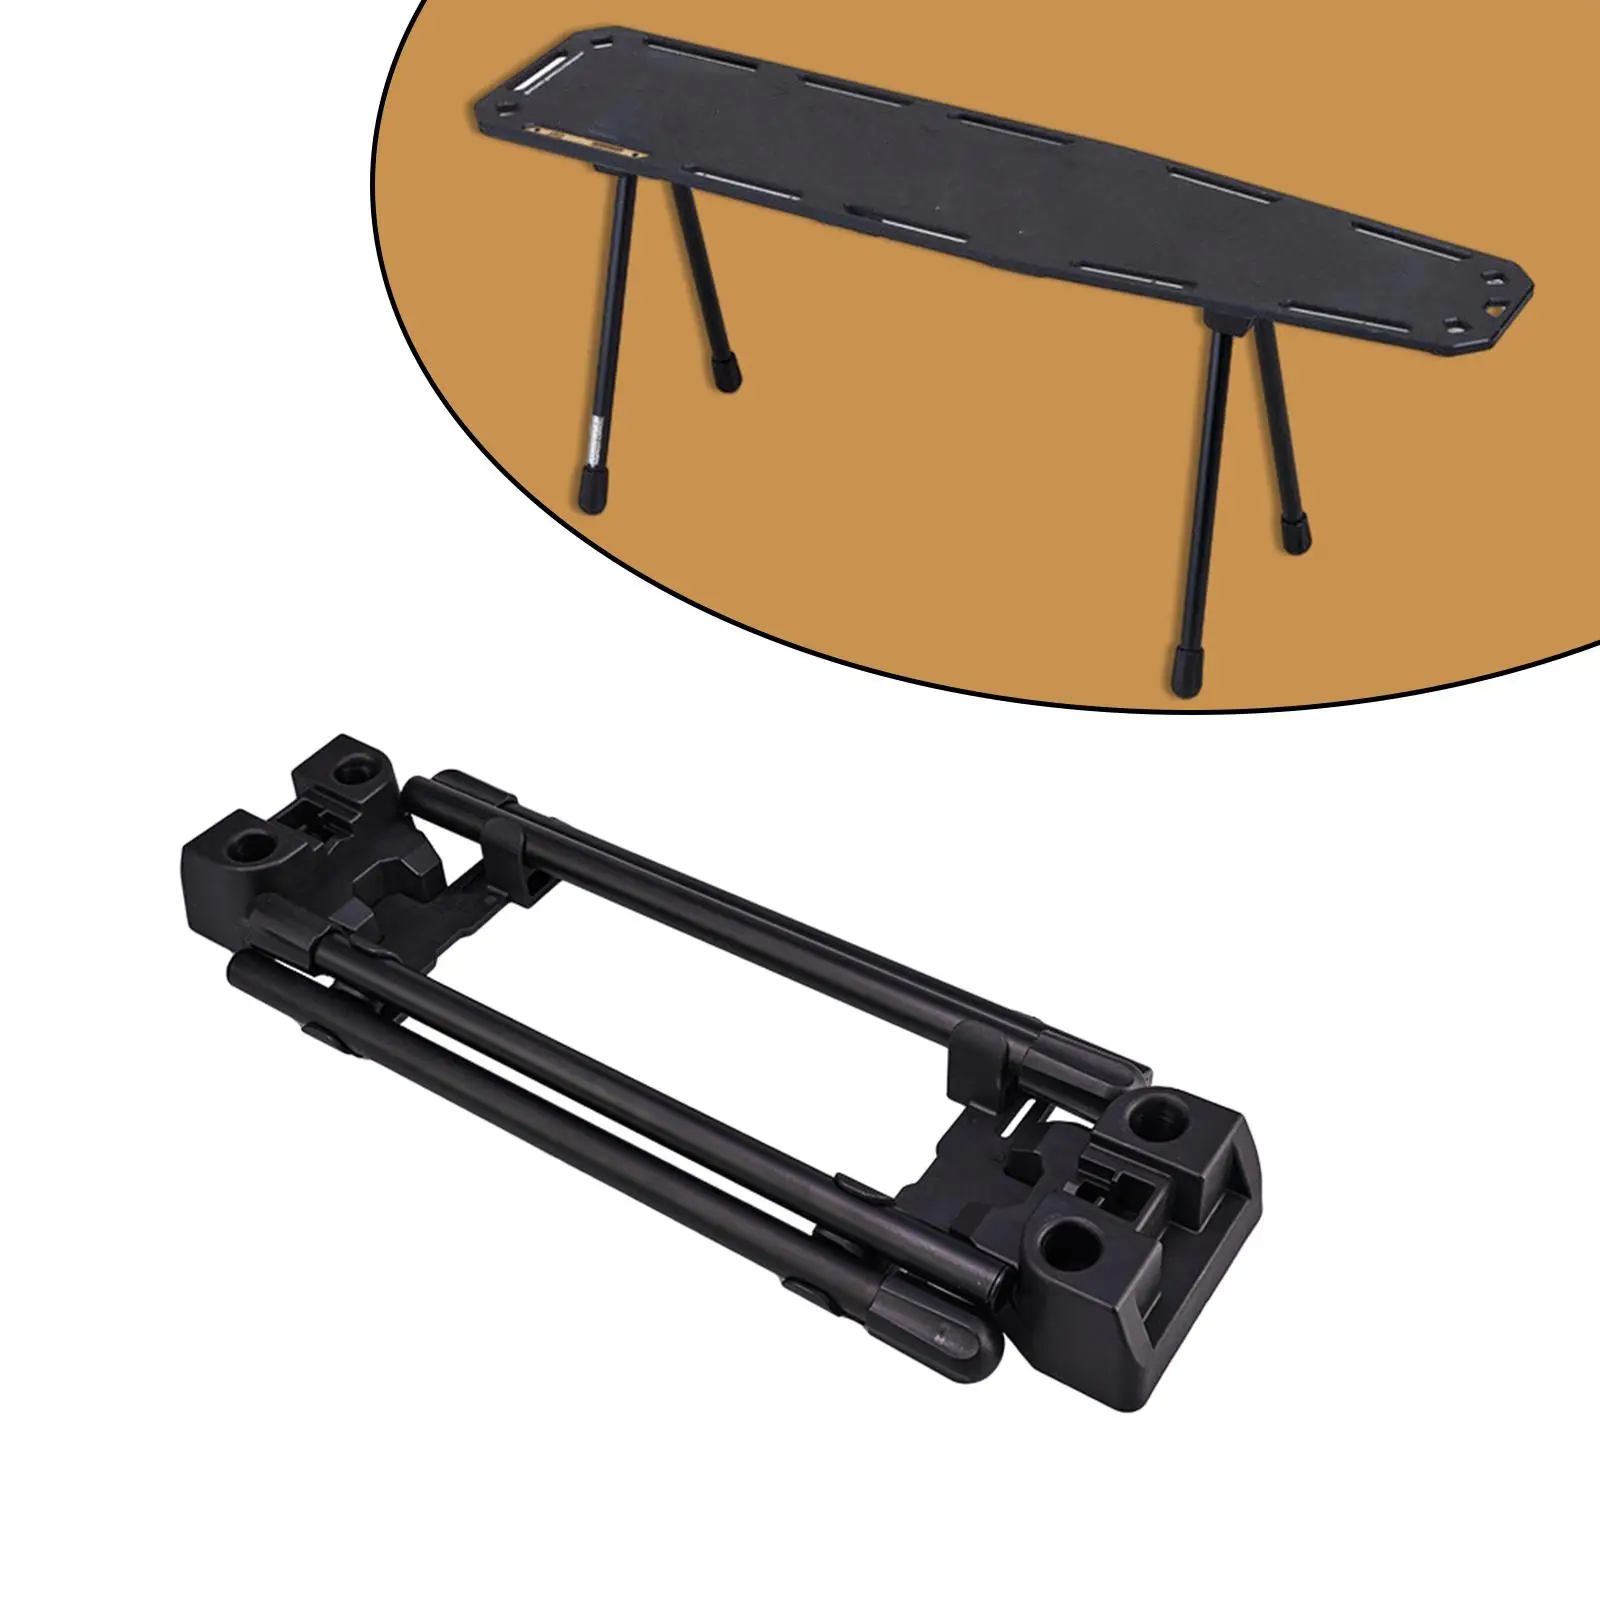 2 Pieces Folding Table Legs Heavy Duty Replacement Furniture Legs for Bench Mini Computer Desk Table Laptop Table Office